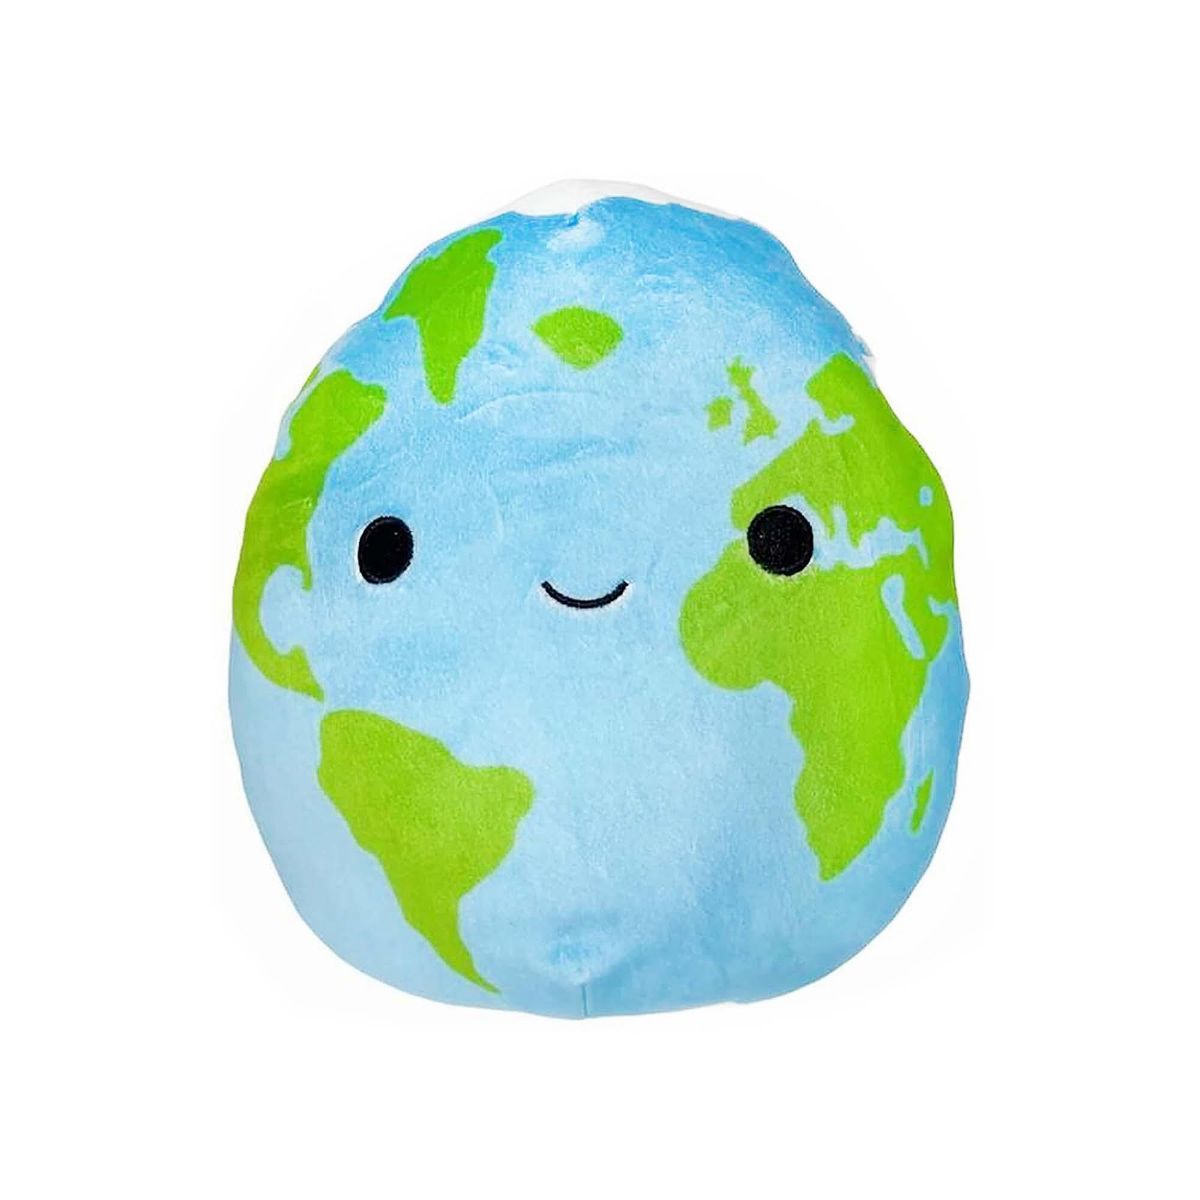 Squishmallows Roman the Planet Earth Space5" Plush | Target